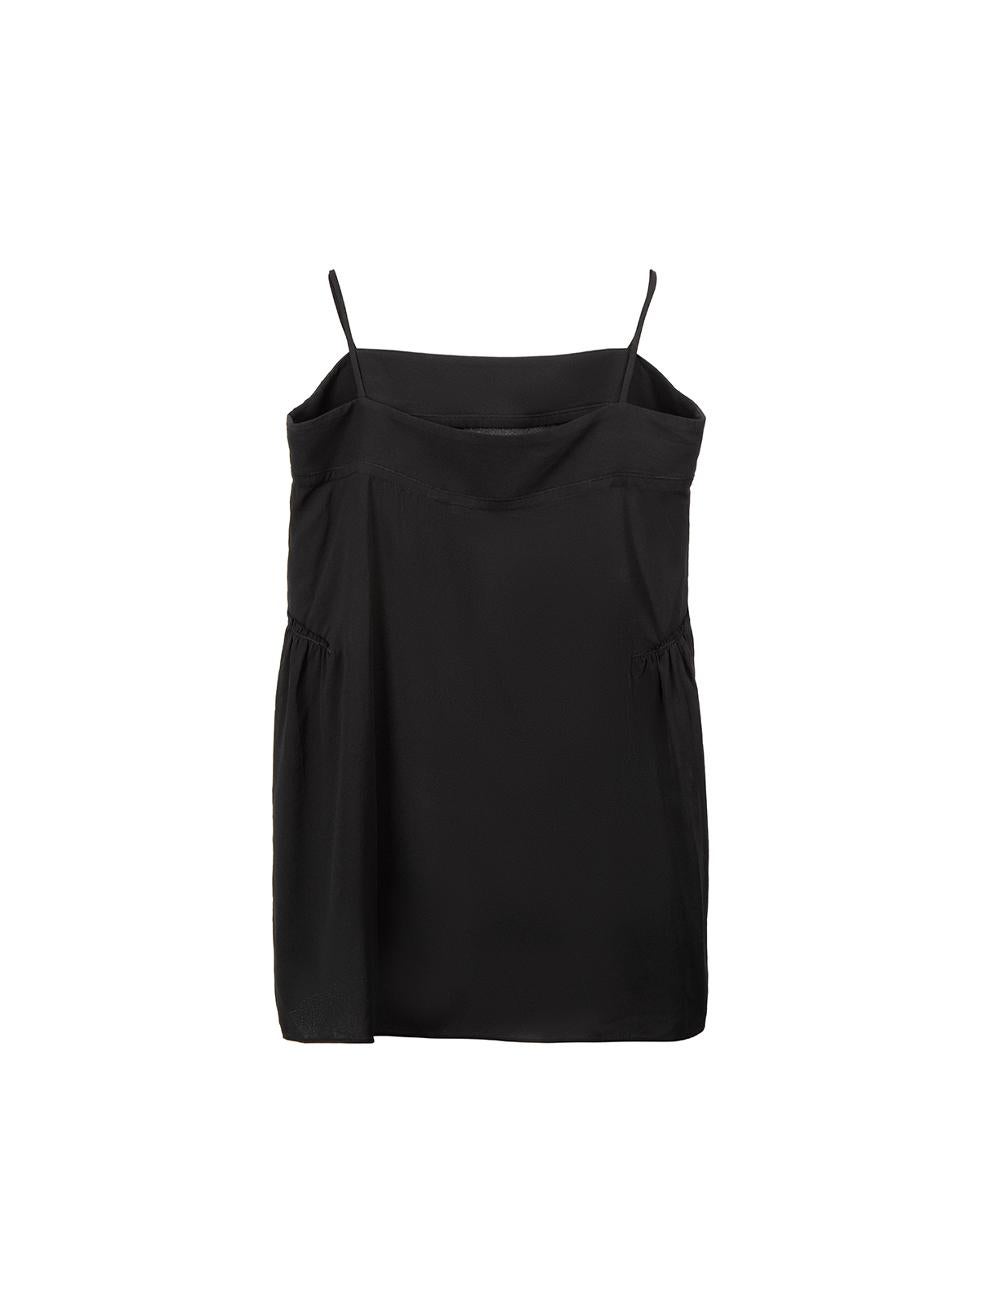 Black Silk Gathered Accent Tank Top Size XS In Good Condition For Sale In London, GB